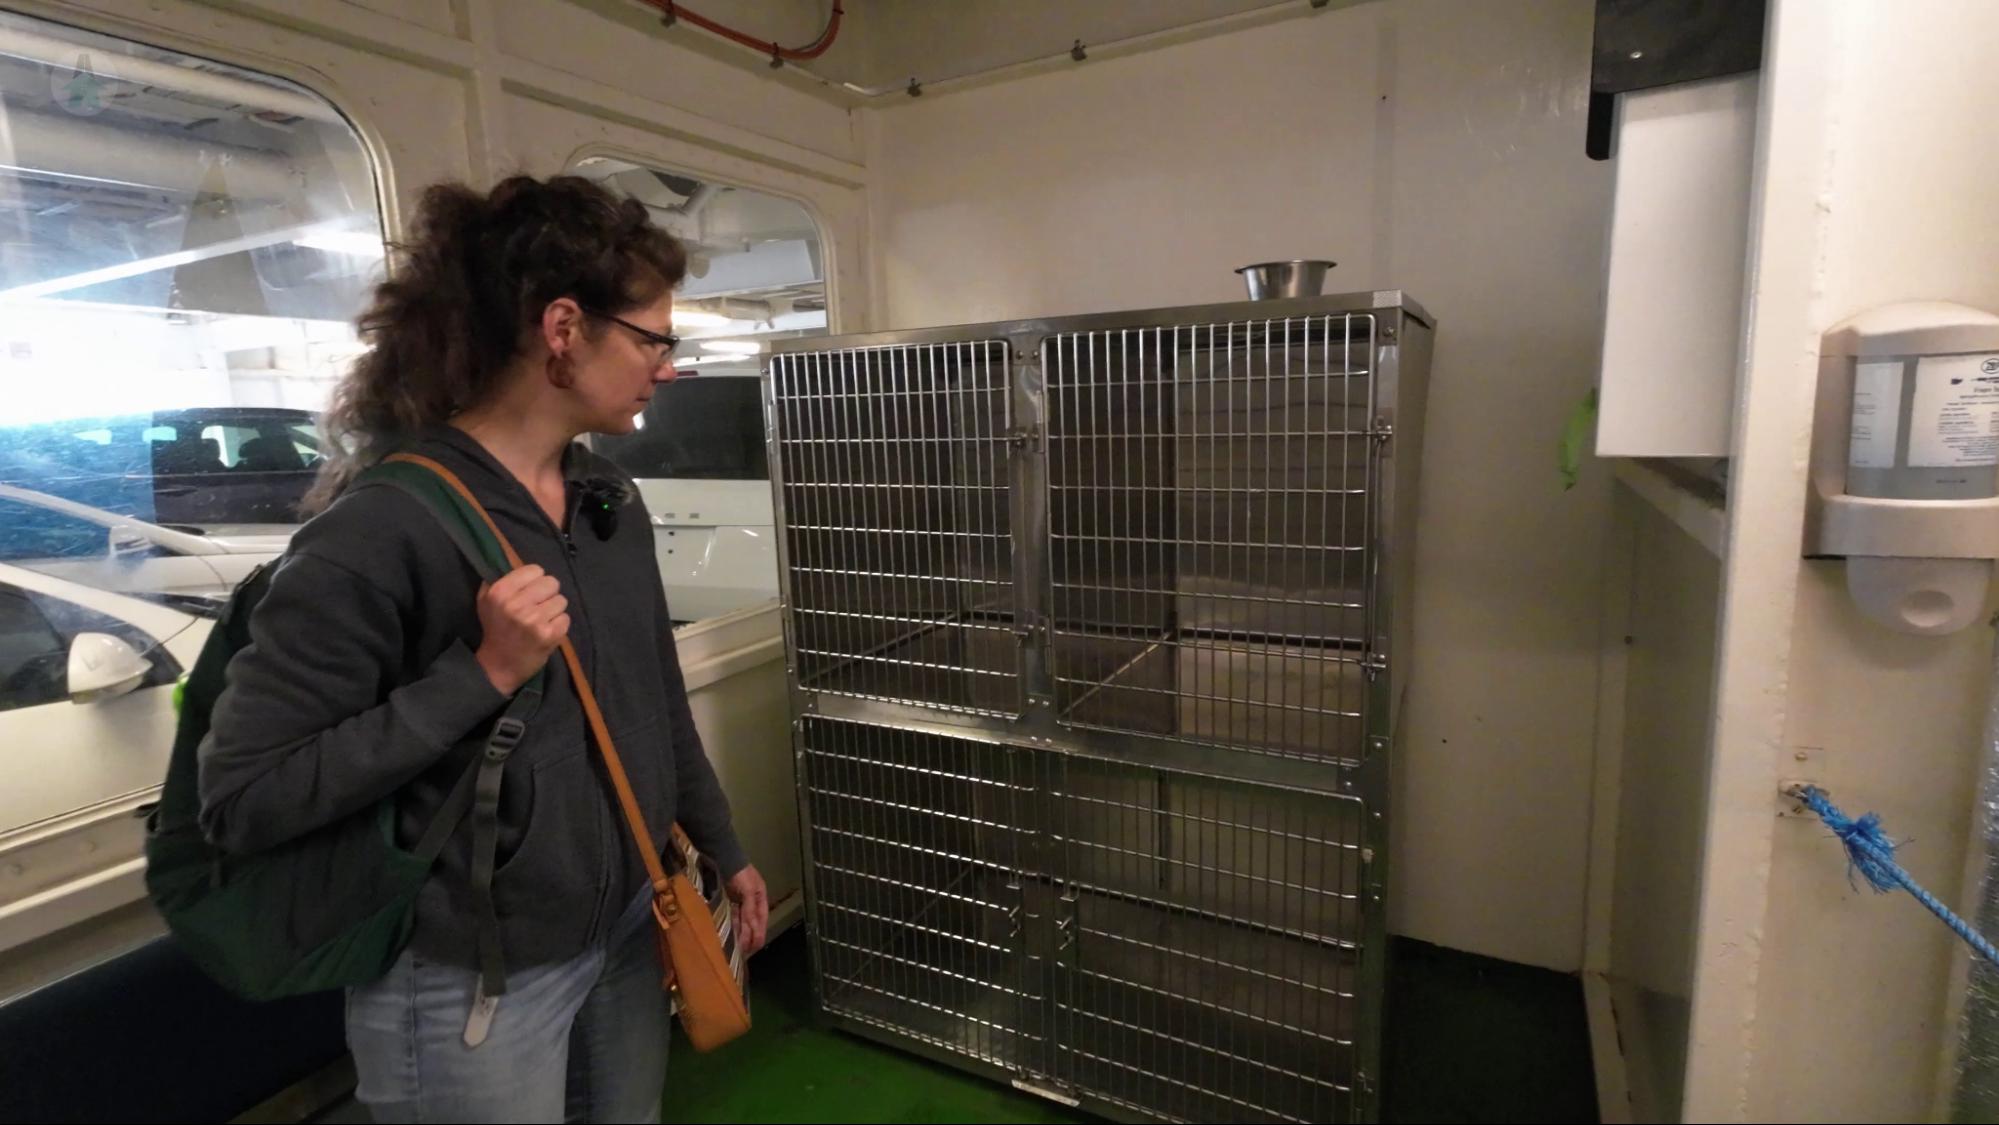 Mel looking at the pet area on a BC ferry. There is a metal kennel, poo bags, and water available. 